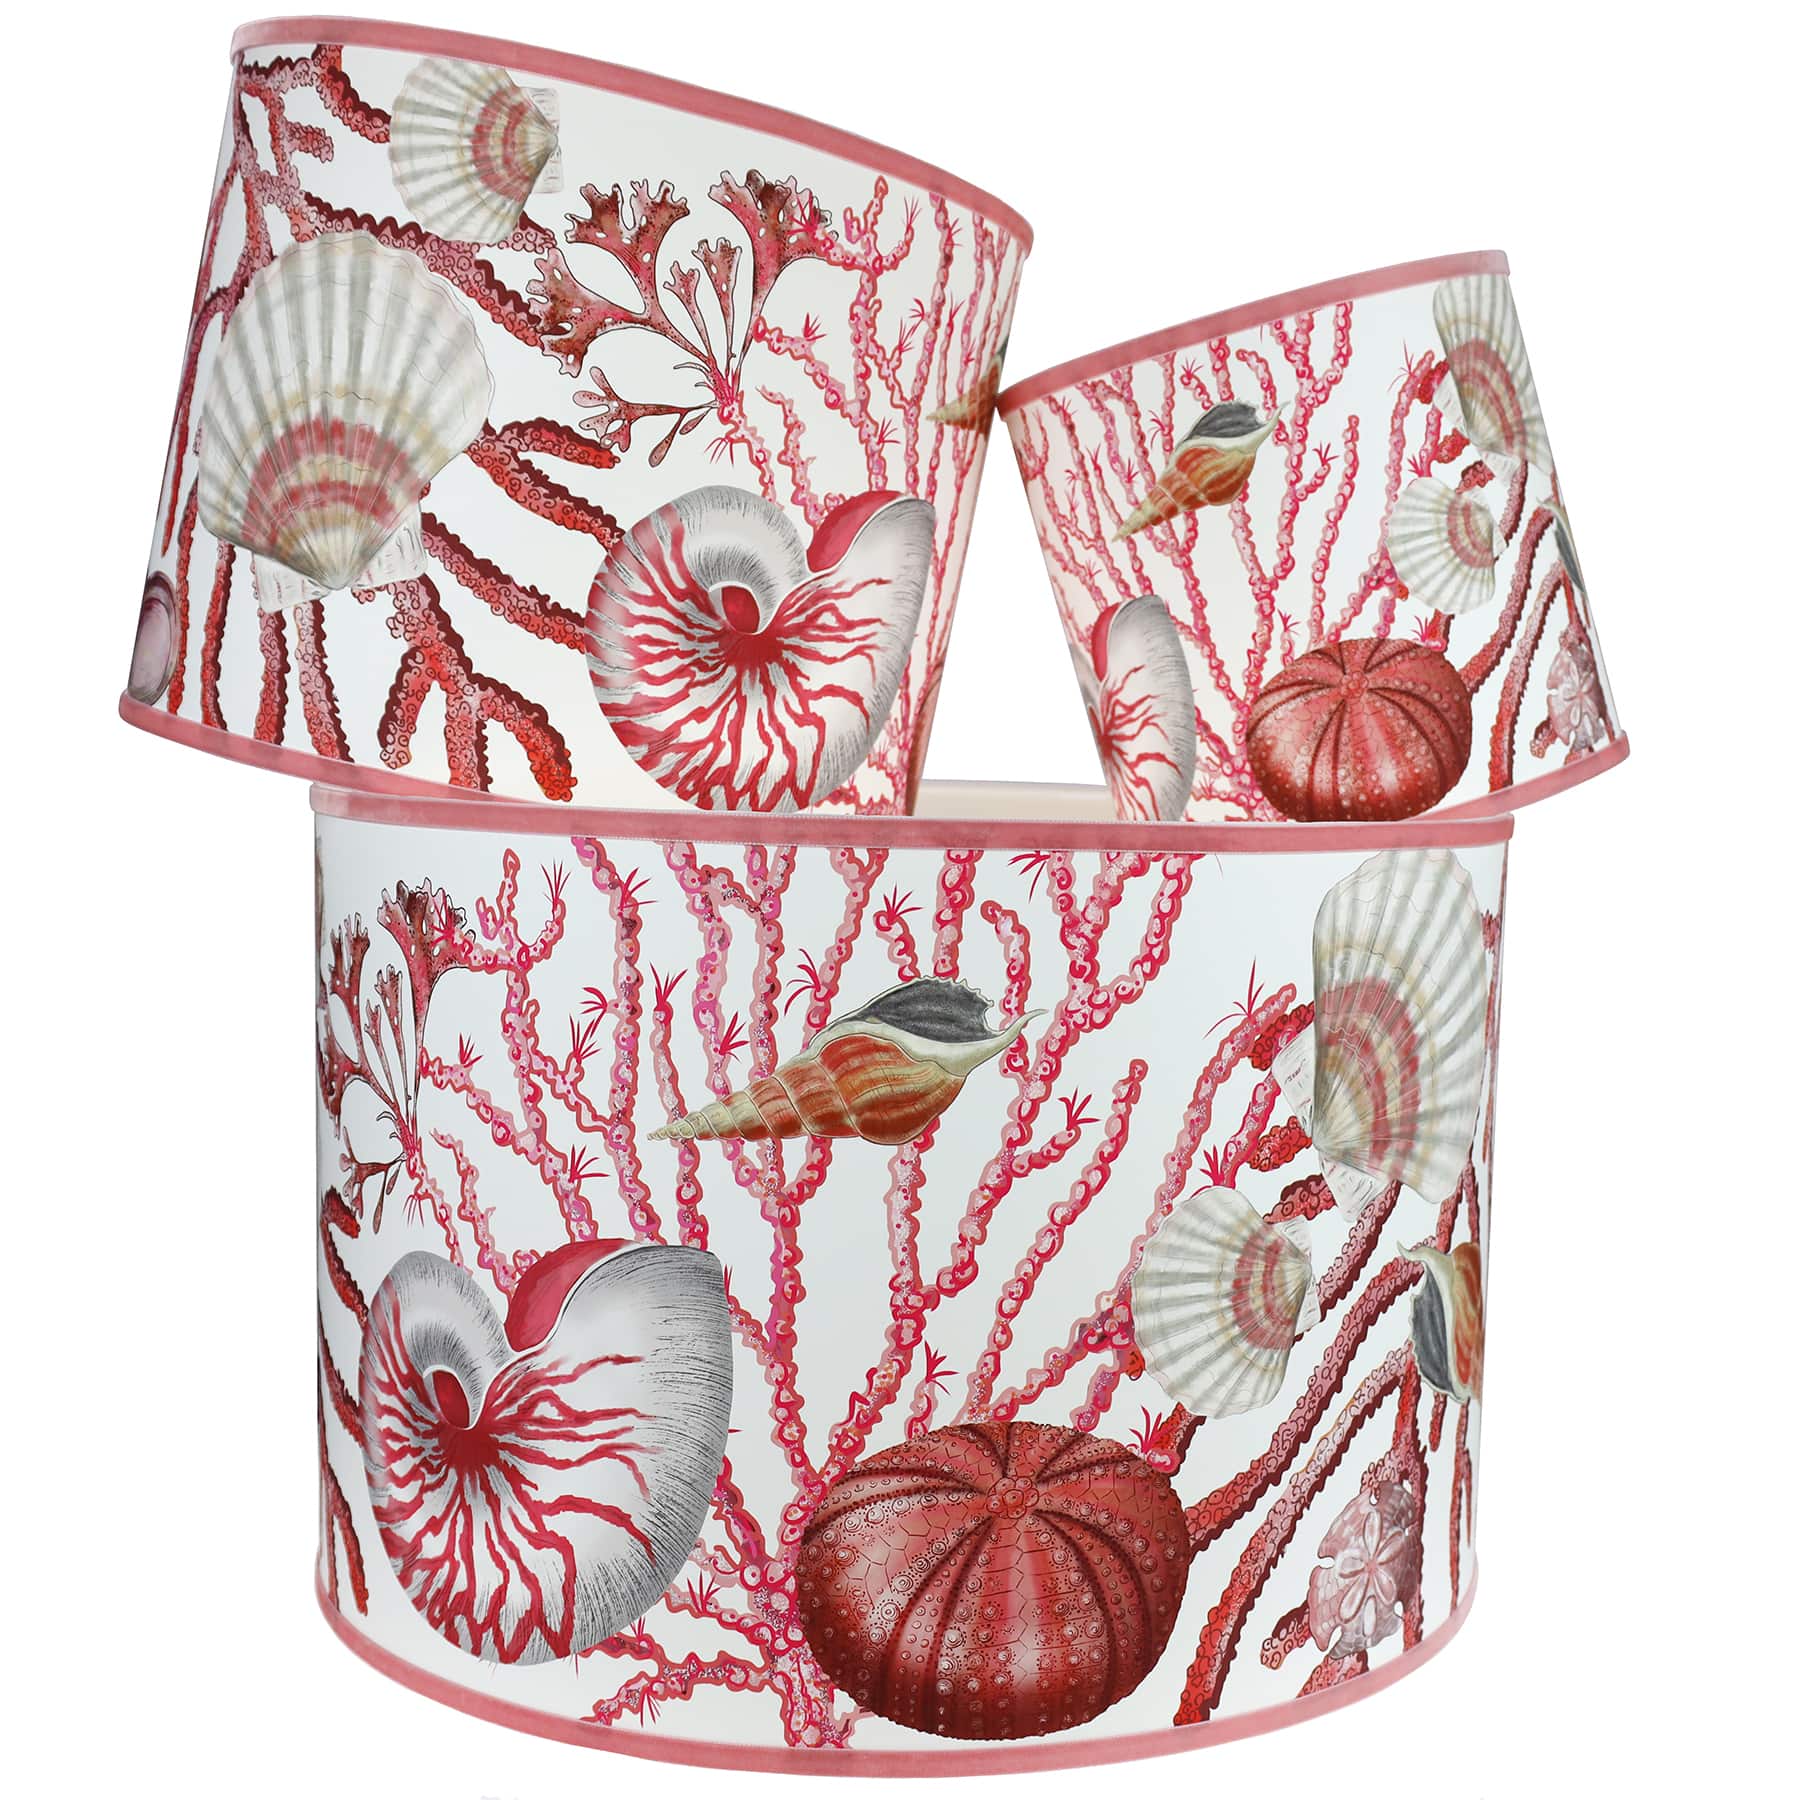 Shell Seeker Off White Shade With Shells,Seaweed,Sea Urchin and Whelks Design in pinks/whites with a pink trim on the edge of the shade.The lampshades are shown in a stack of three showing all three sizes.